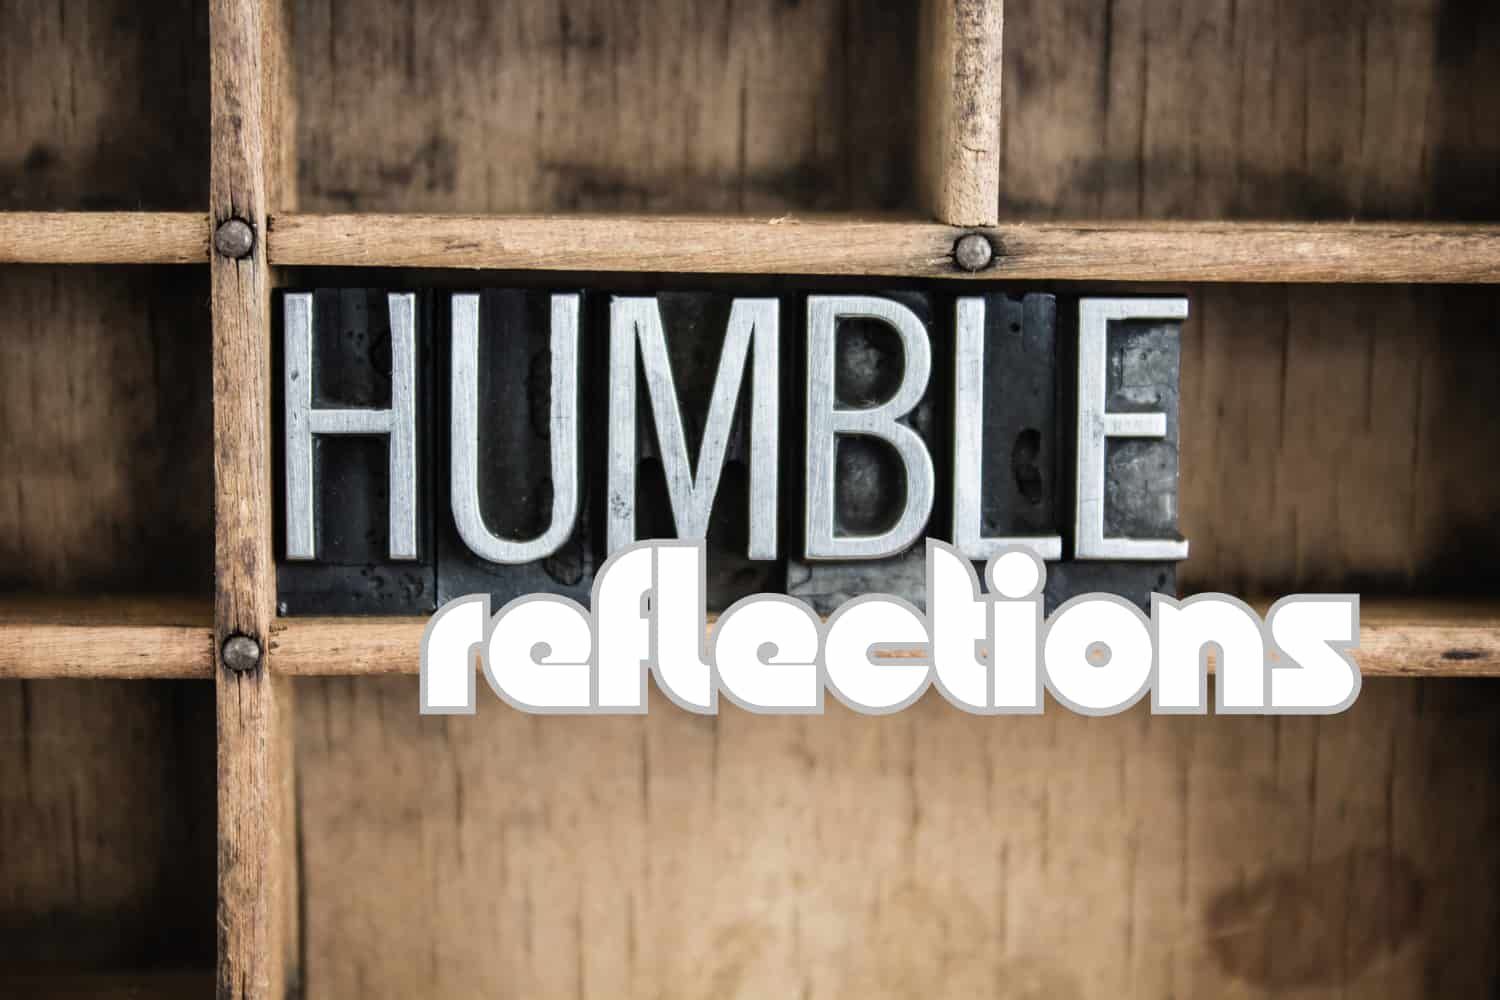 Object%20lesson%20-%20NT%20The%20pharisee%20and%20the%20tax%20collector%20-%20Humble%20reflections-5792de36 Forgiveness